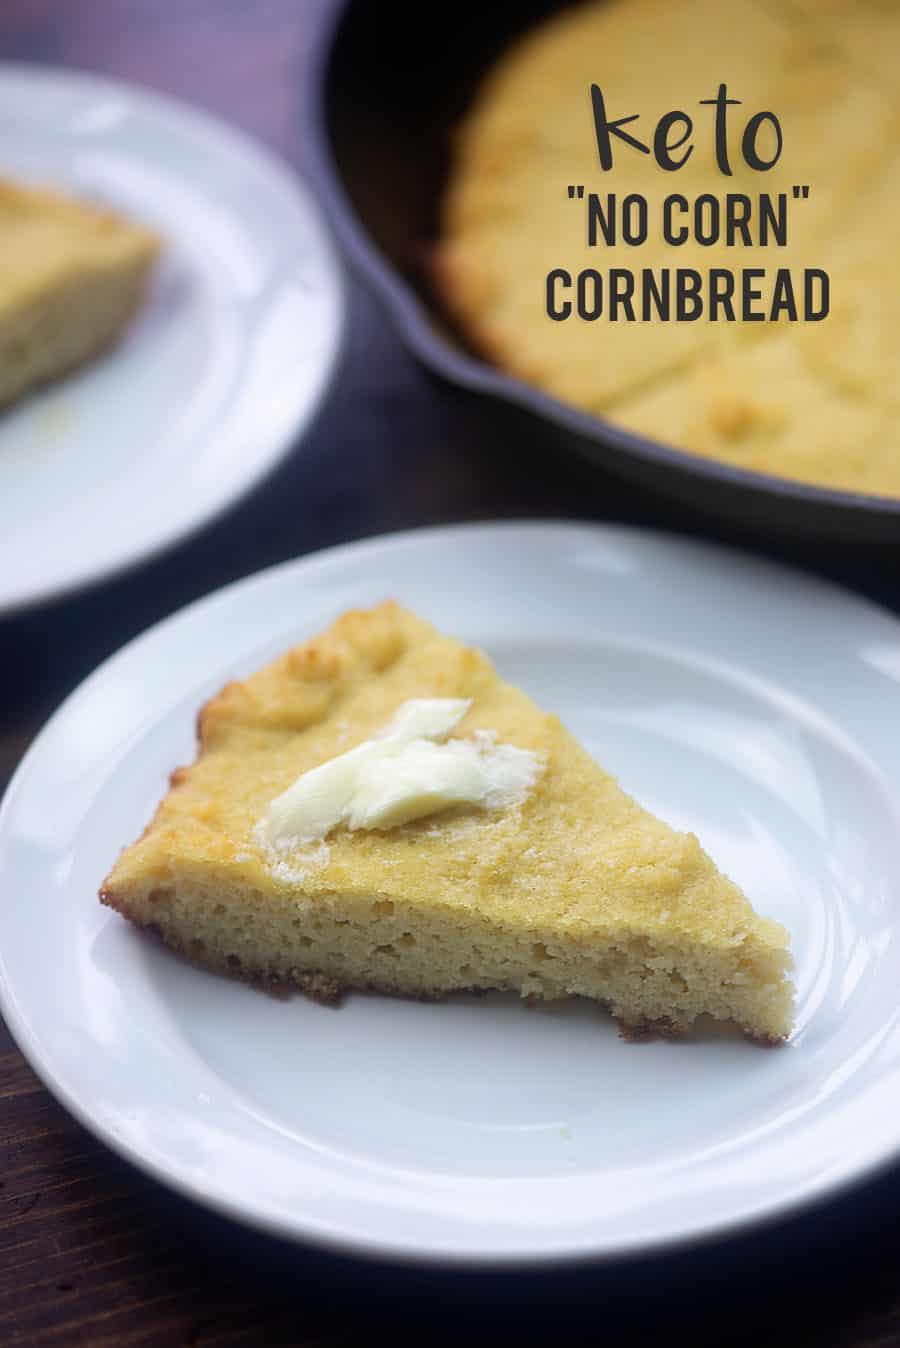 20 Fun and Creative Low Carb Corn Bread - Best Product Reviews